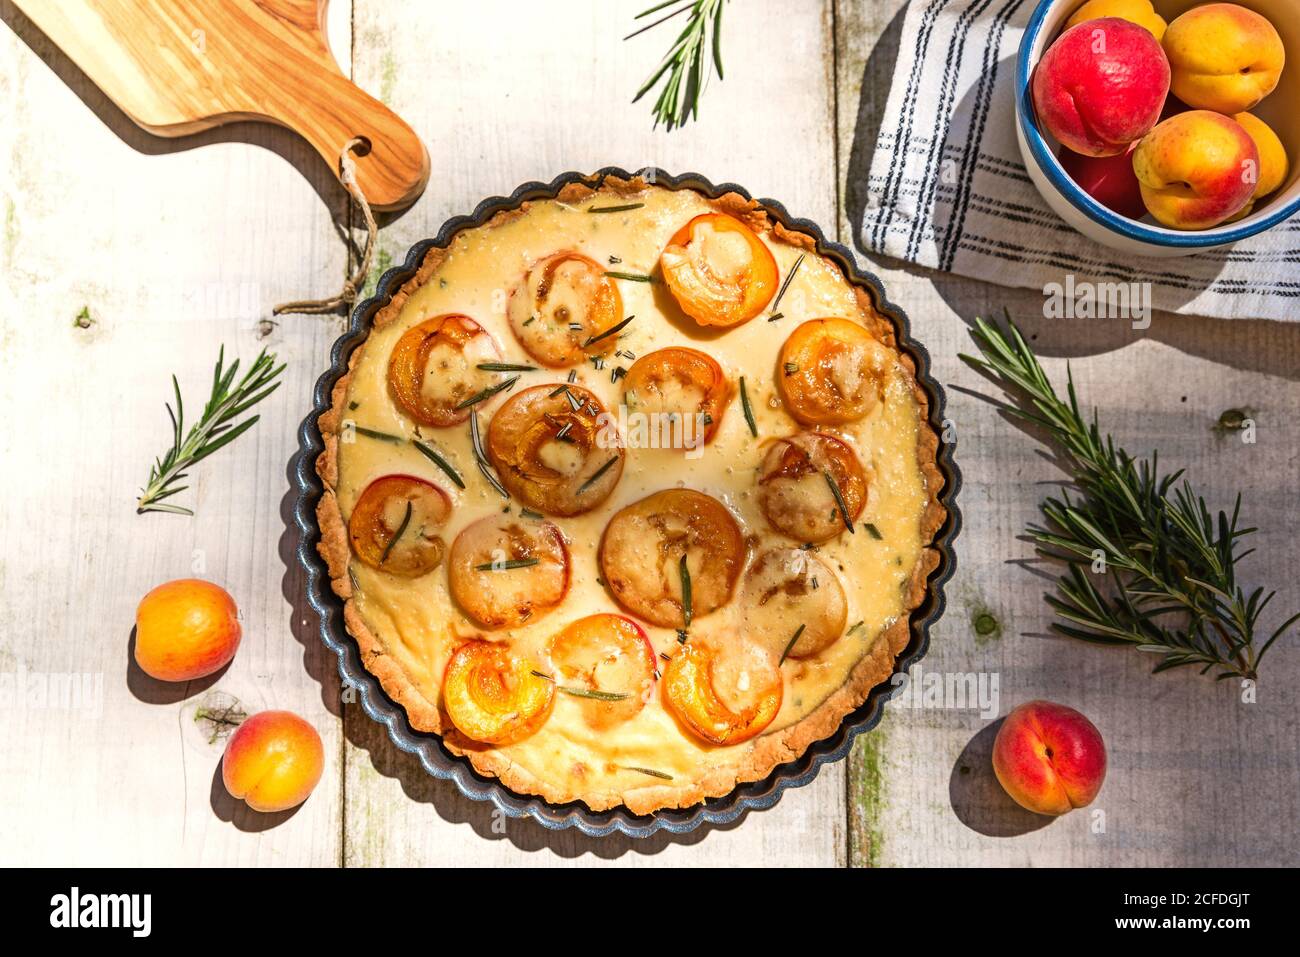 Apricot sour cream tart on a garden table with apricot rosemary decoration, bowl of apricots and cutting board cut at the edge of the picture. Stock Photo